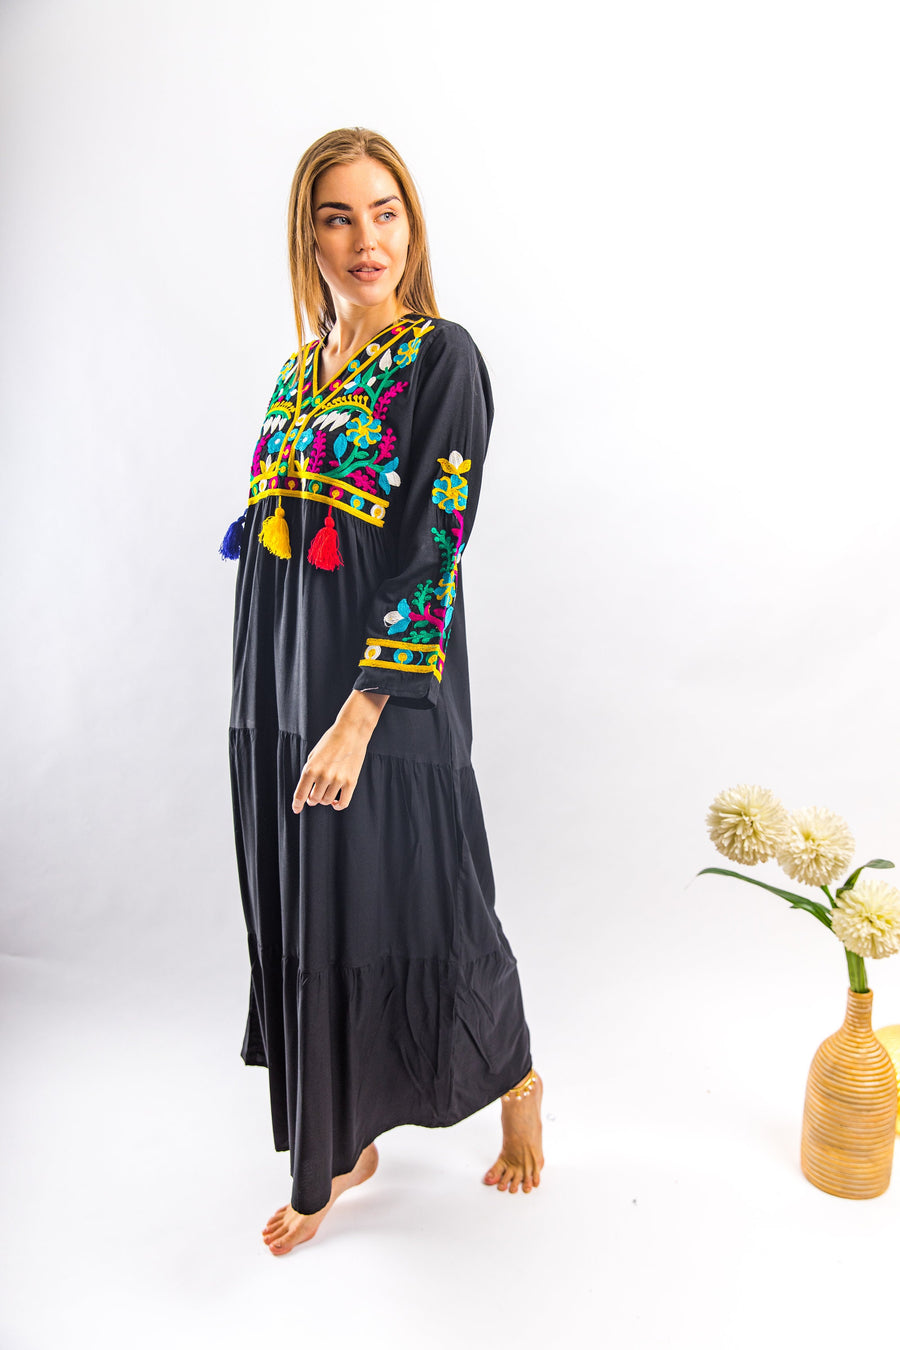 Black embroidered Caftan with tassels, caftans for women, embroidered Caftan dress, Caftan maxi dress, Caftans for women, Caftans